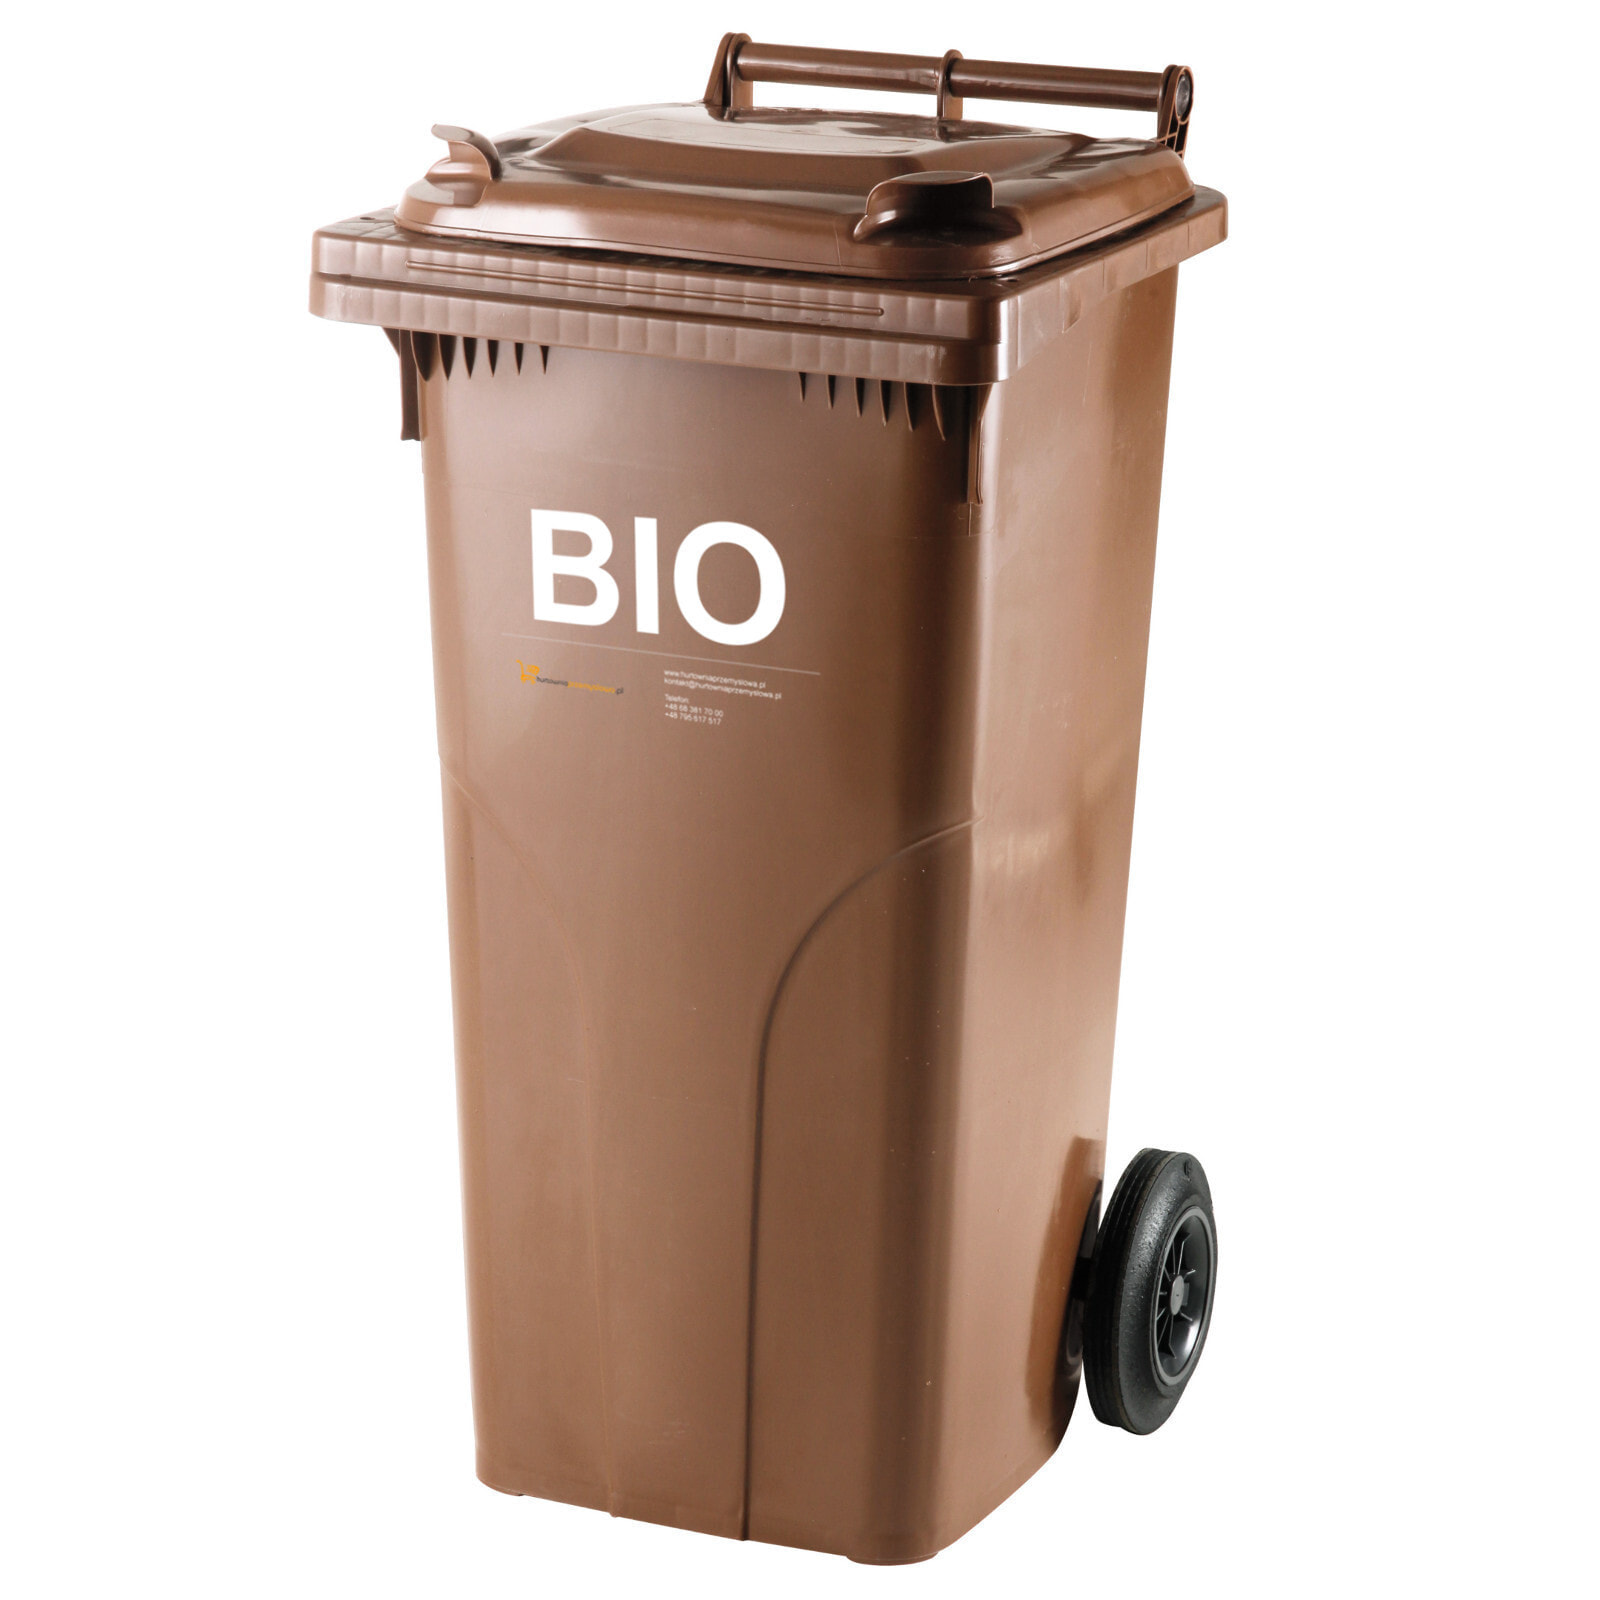 BIO bucket container for food waste and rubbish. ATESTS Europlast Austria - brown 120L